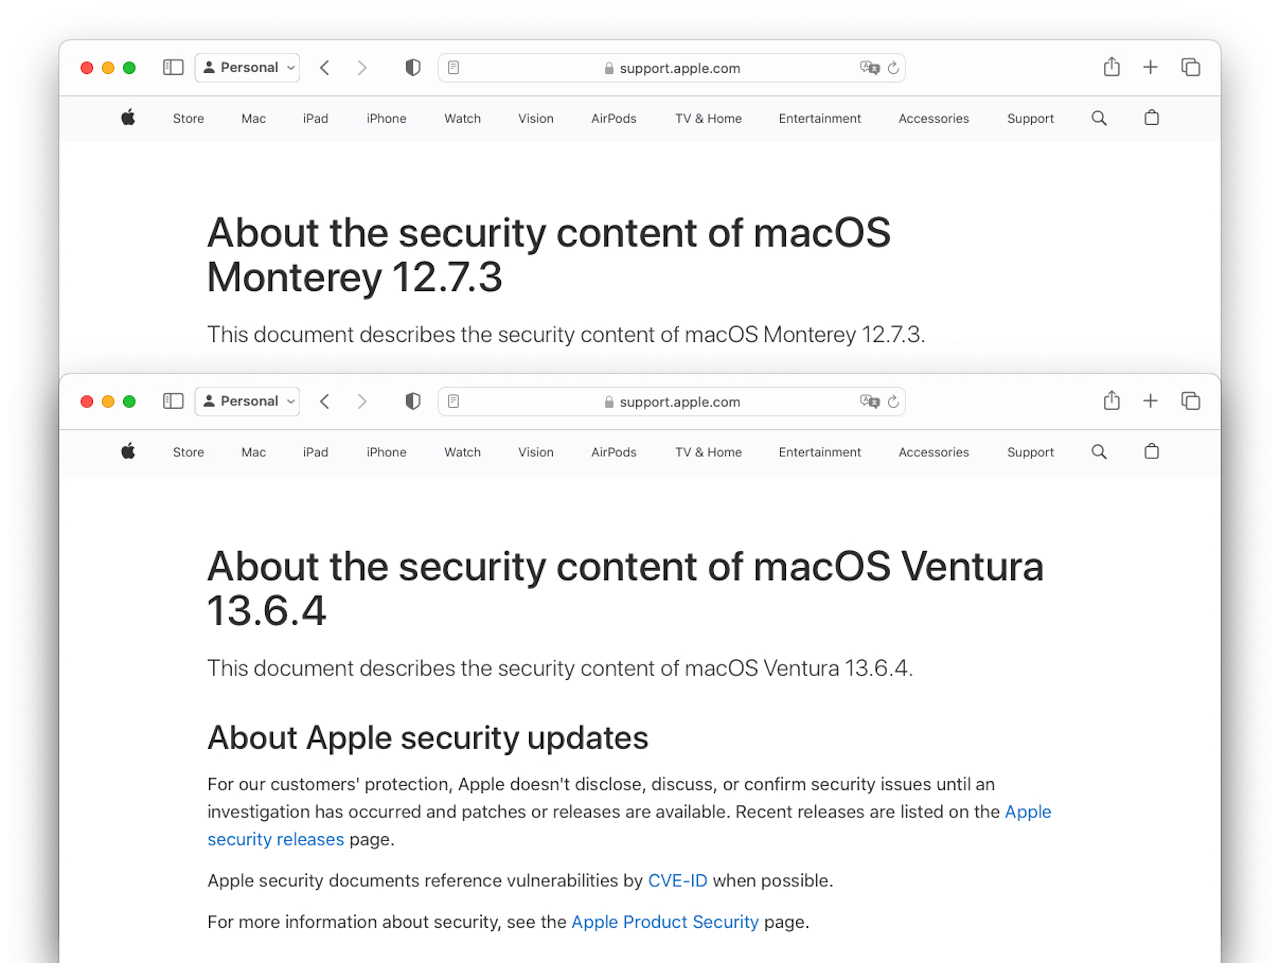 About the security content of macOS Ventura 13.6.4